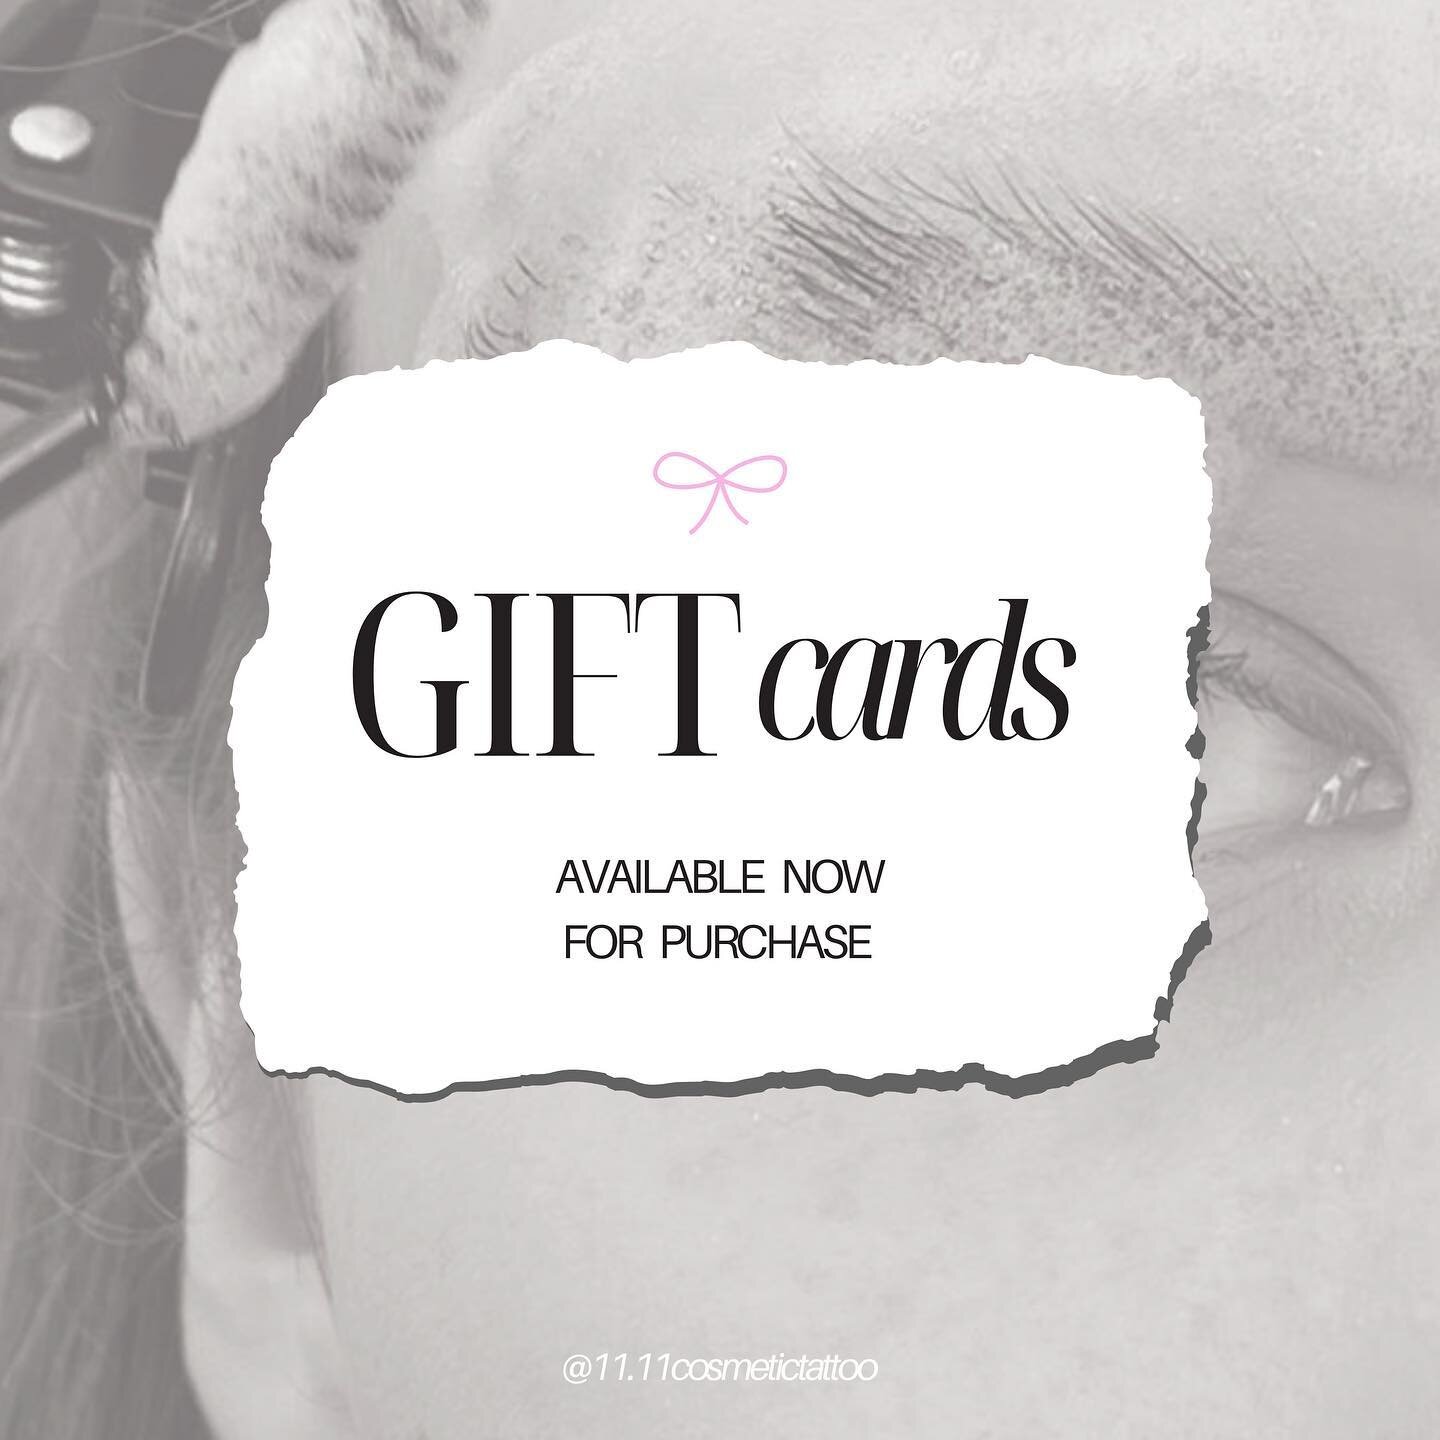 I am now offering e-gift cards✨

This is the perfect gift this holiday season for the family member or friend that has been eyeing one of my services! 

Go to the link in my bio to purchase an e-gift card! You&rsquo;re able to use these gift cards at